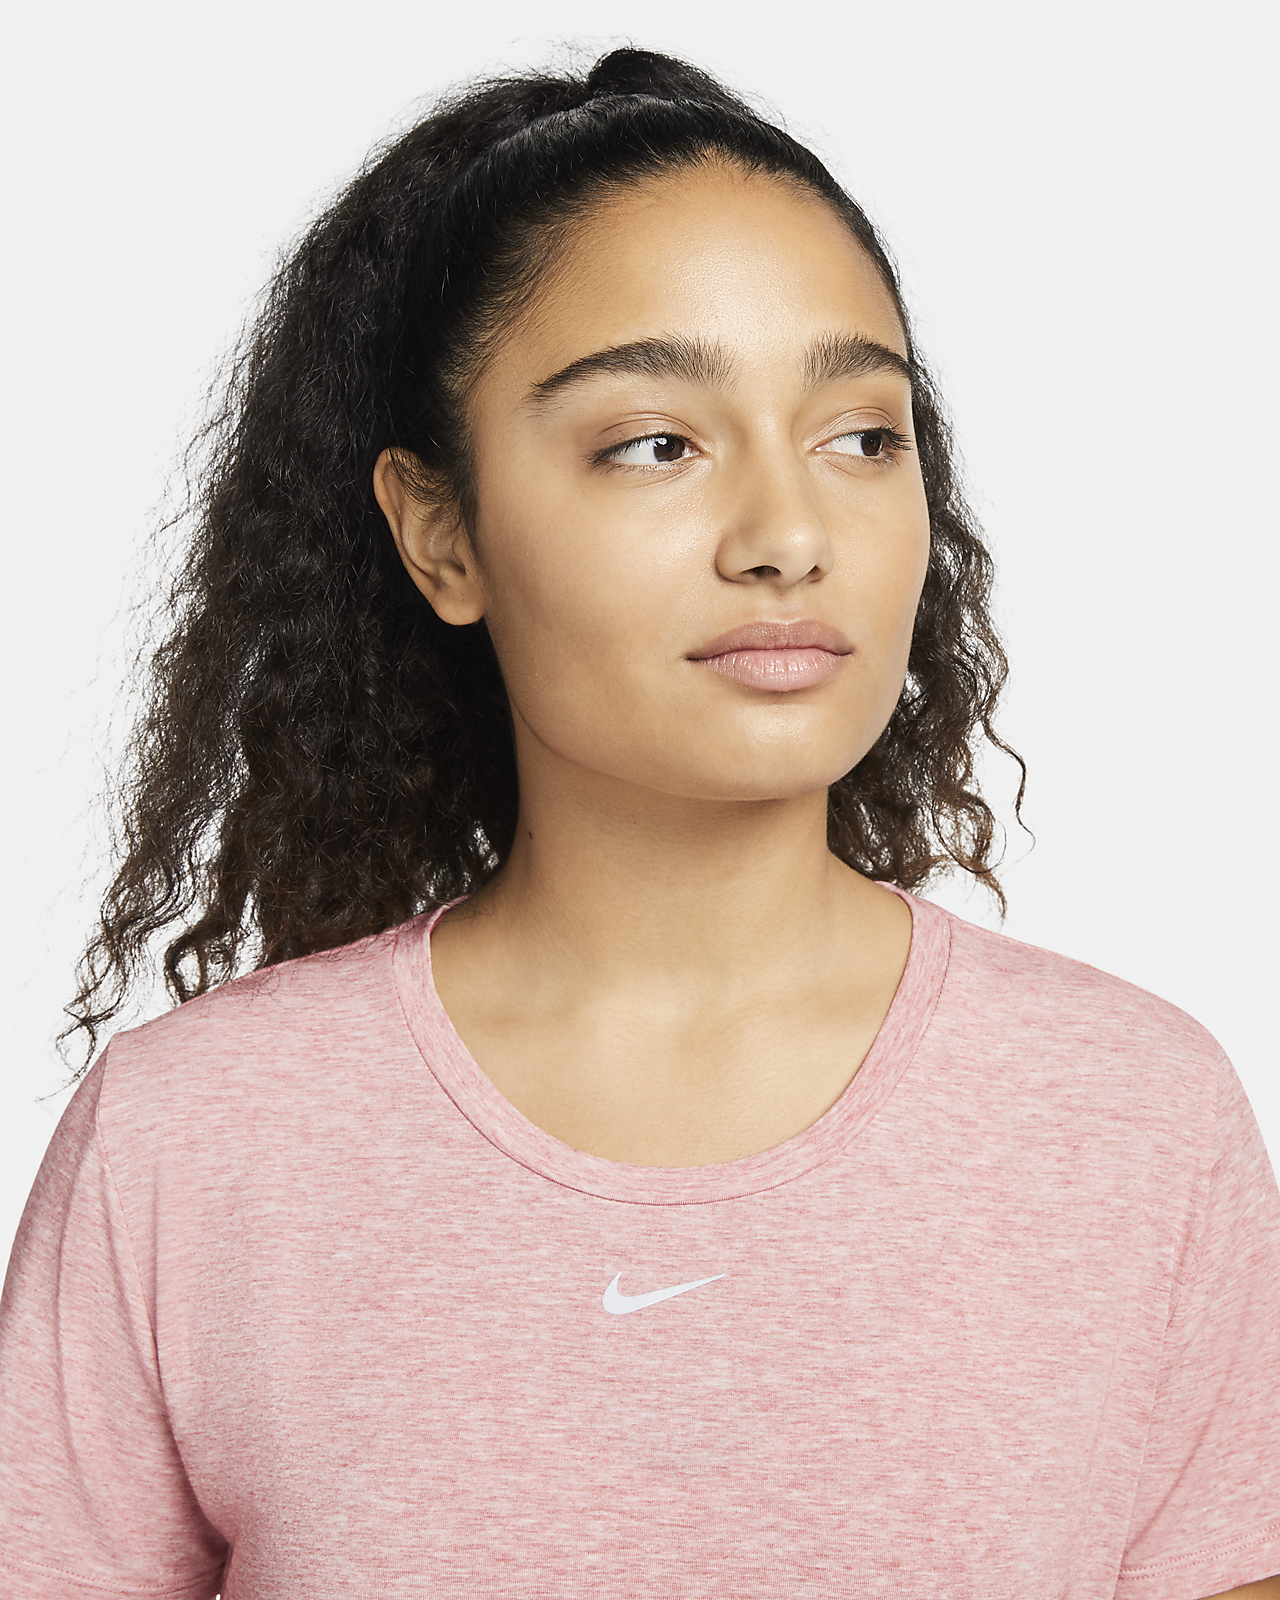 nike dri-fit one luxe